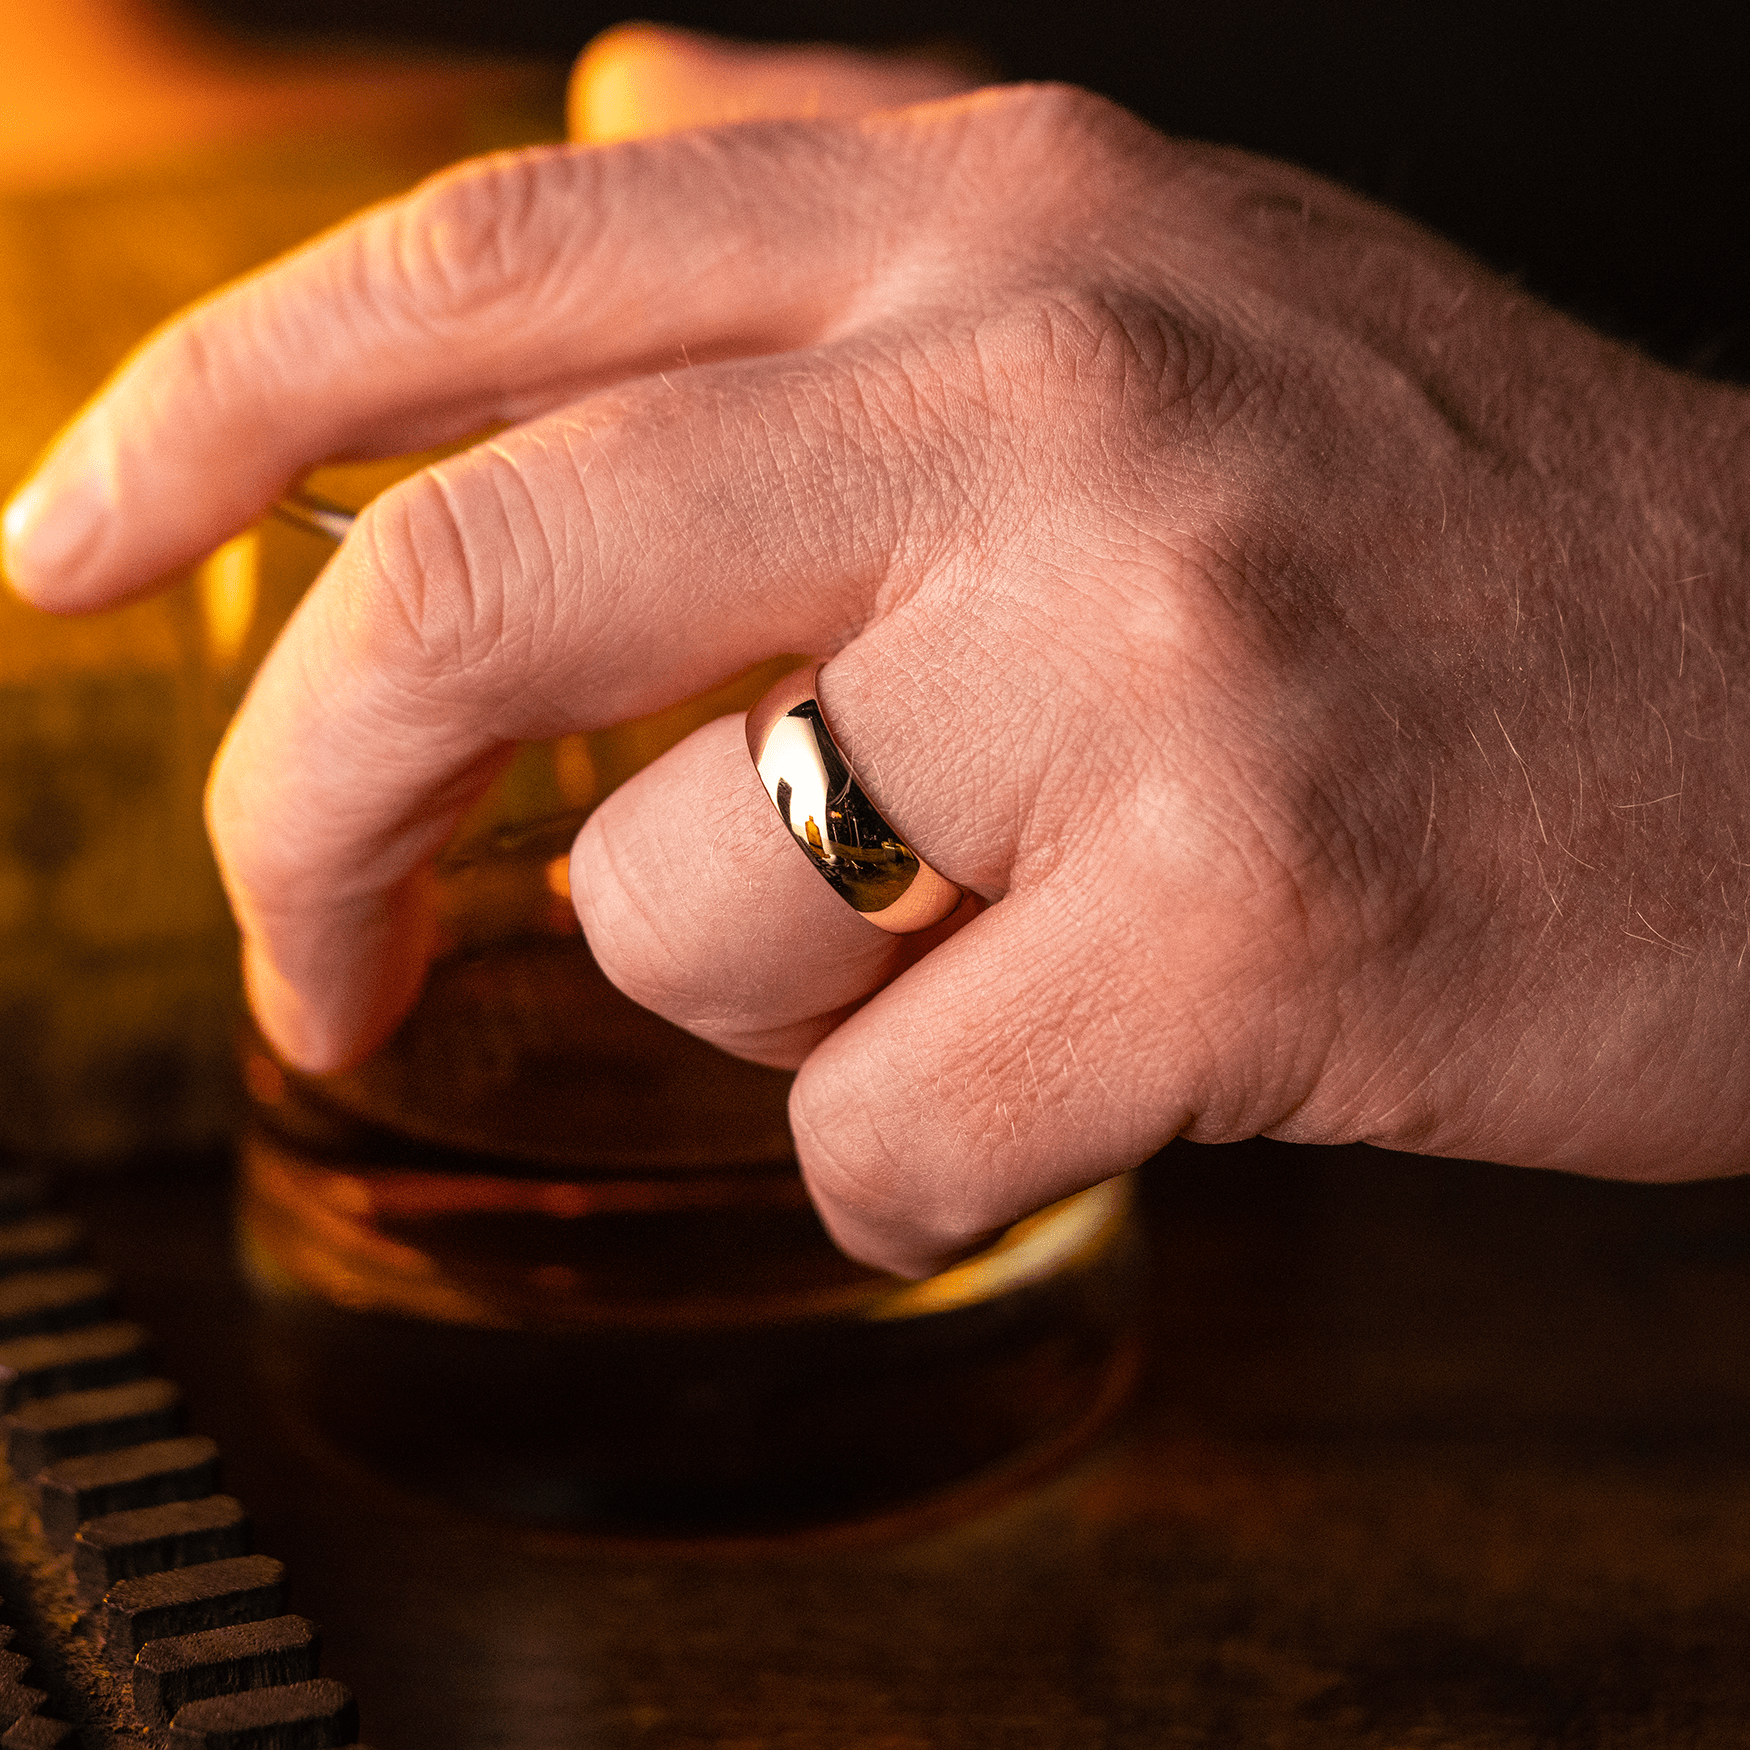 The Prince - Men's Wedding Rings - Manly Bands